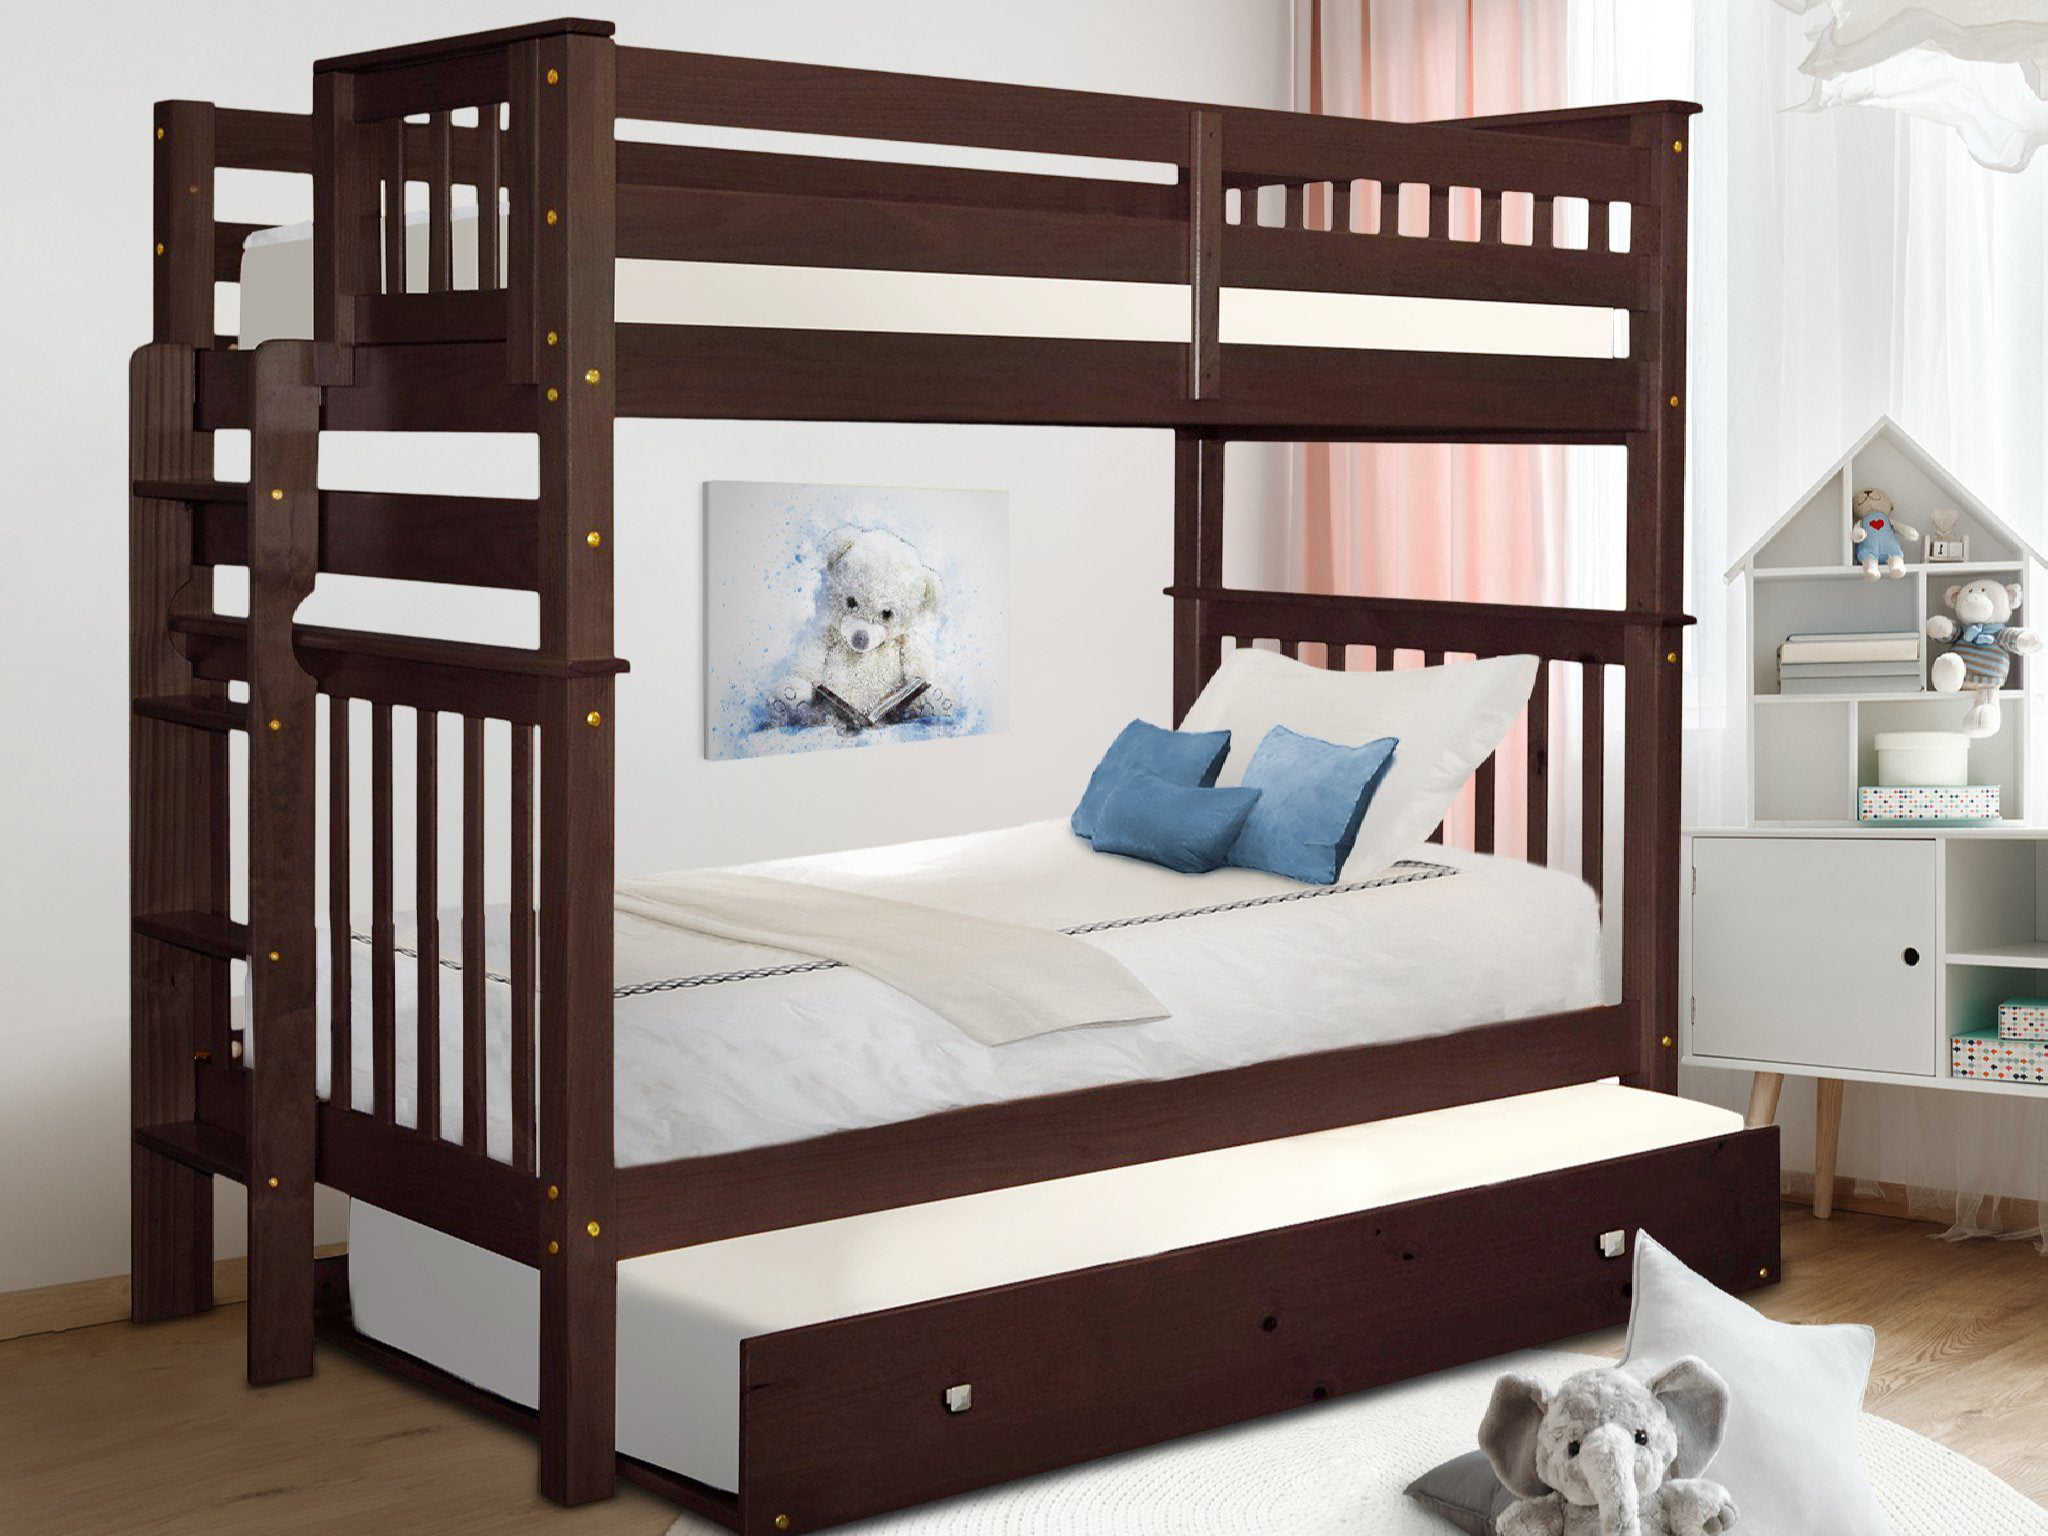 Bedz King Tall Bunk Beds Twin Over, Bunk Beds With Trundle And Mattresses